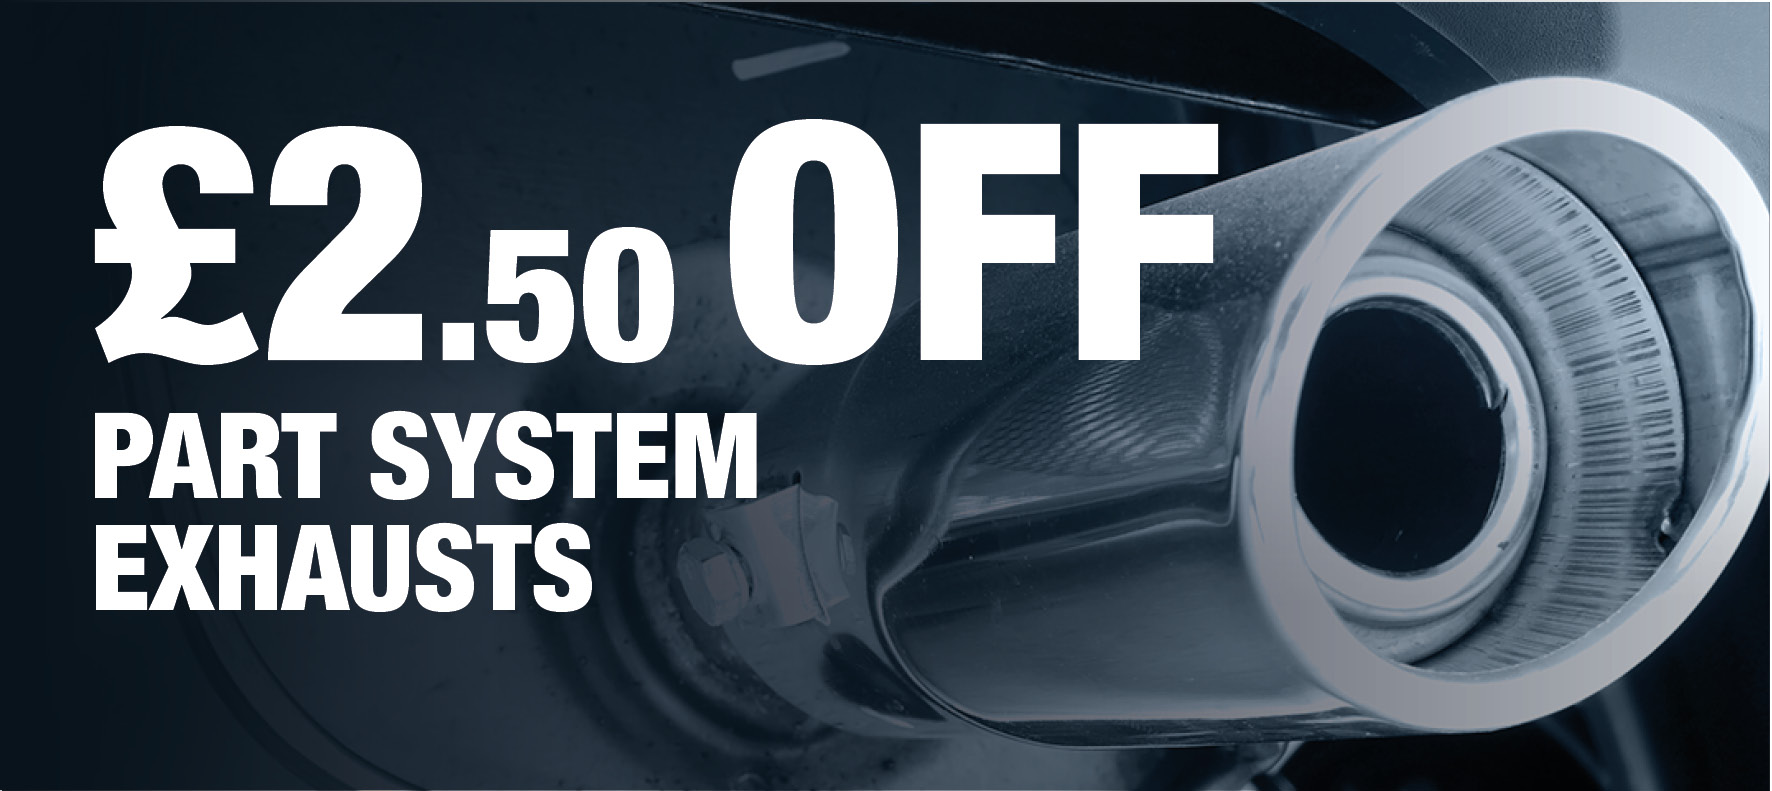 Save £2.50 on Part System Exhausts at Formula One Autocentres